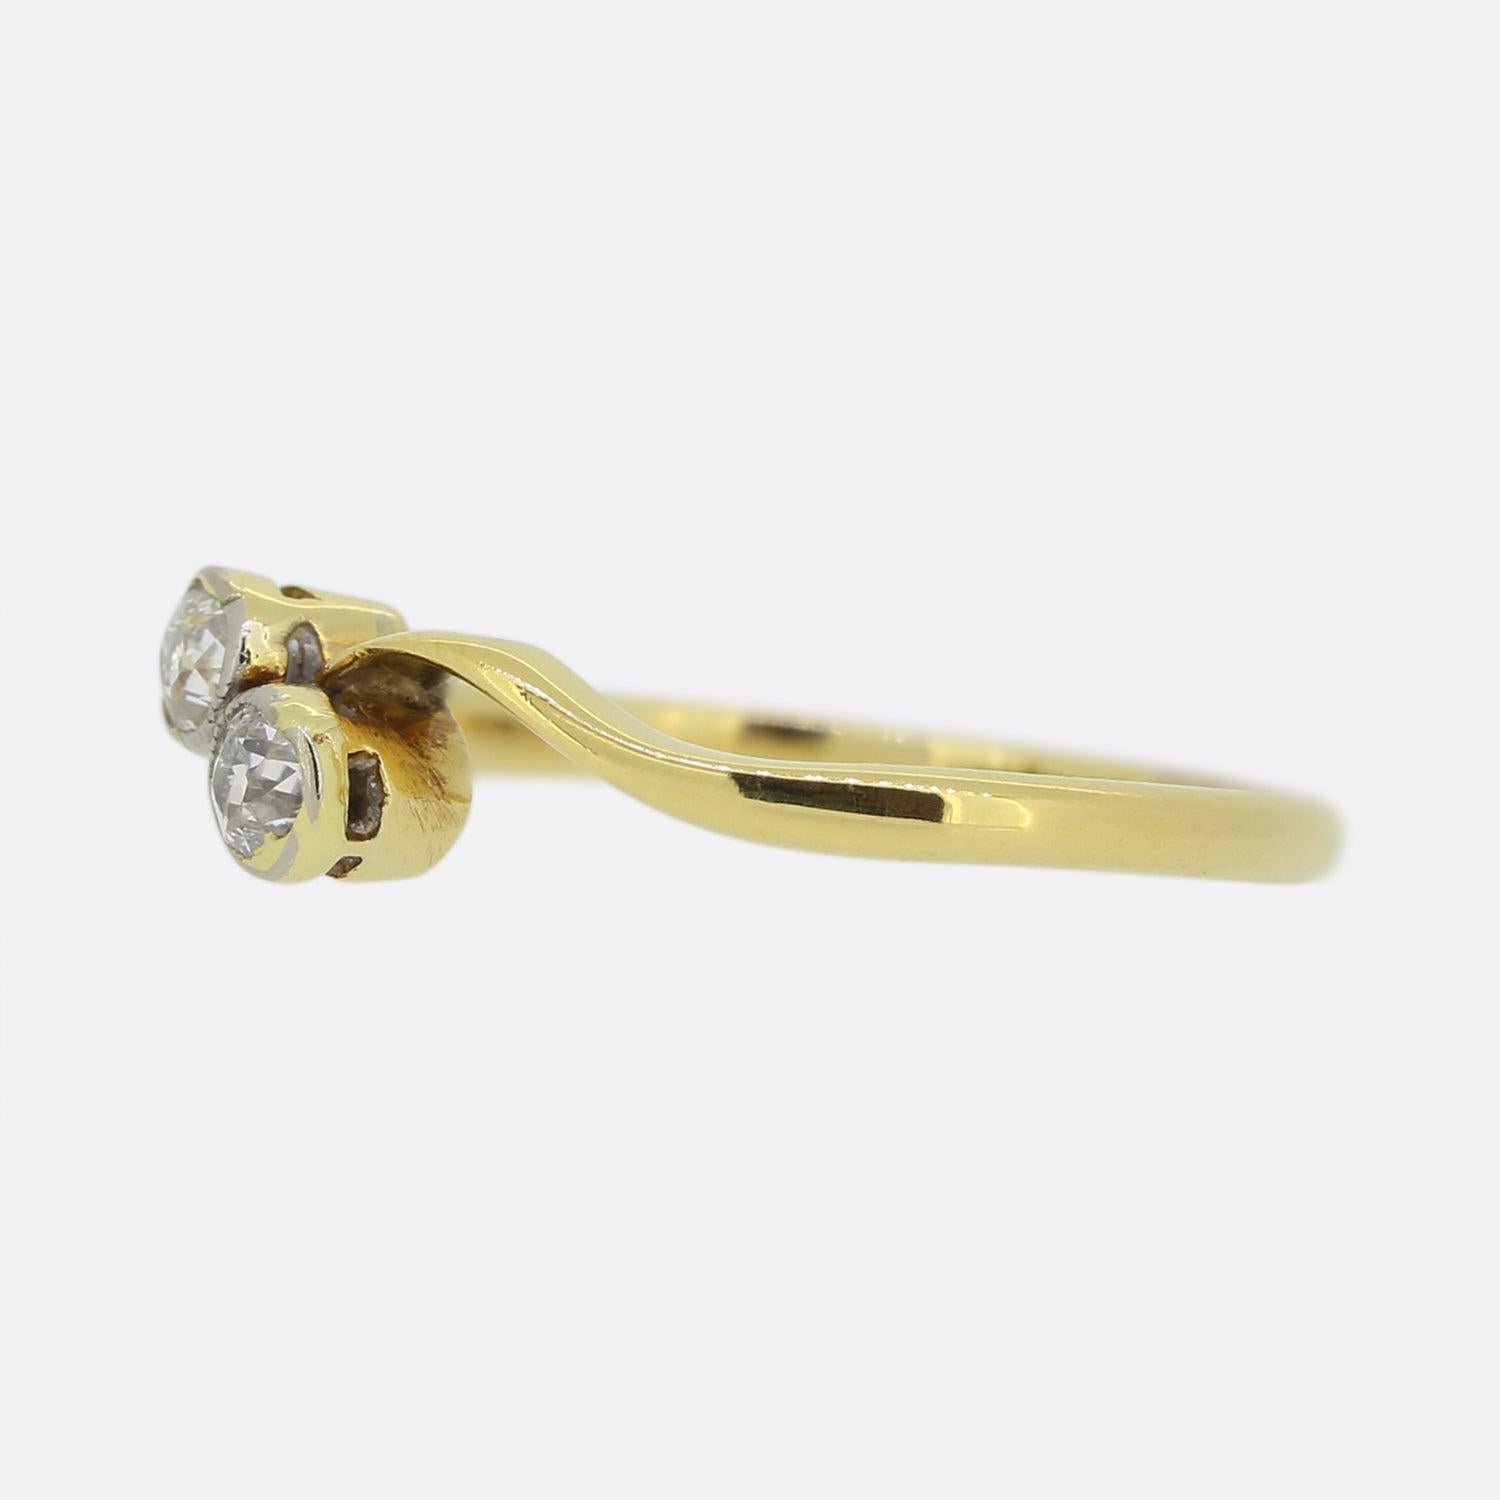 Here we have a classic two stone diamond ring. This vintage piece has been crafted from 18ct yellow gold and presents two closely rub-over set round old cut diamonds atop a thin swirling band. 

Condition: Used (Very Good)
Weight: 2.1 grams
Ring